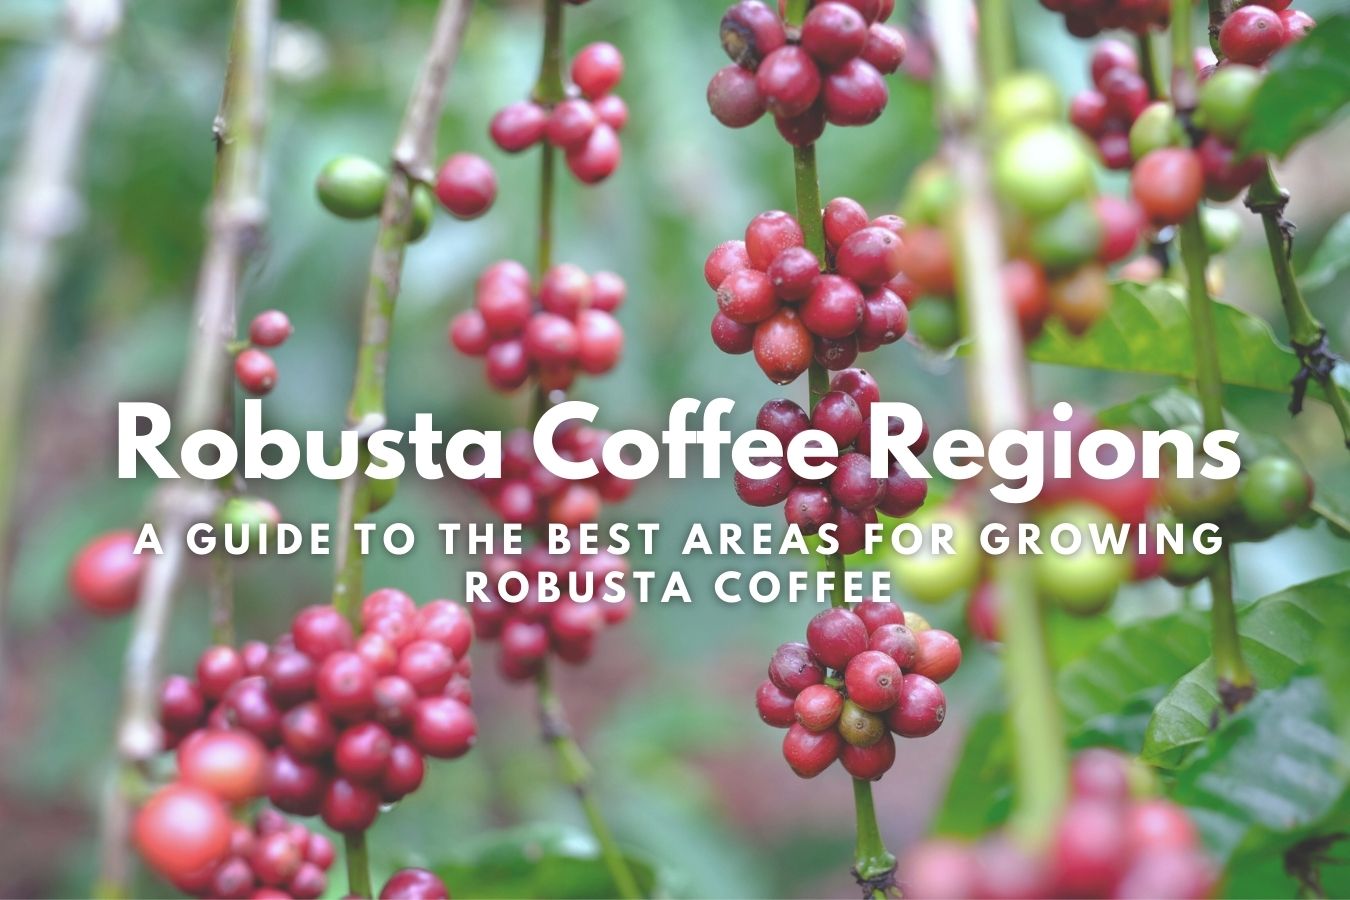 Robusta Coffee Regions A Guide to the Best Areas for Growing Robusta Coffee